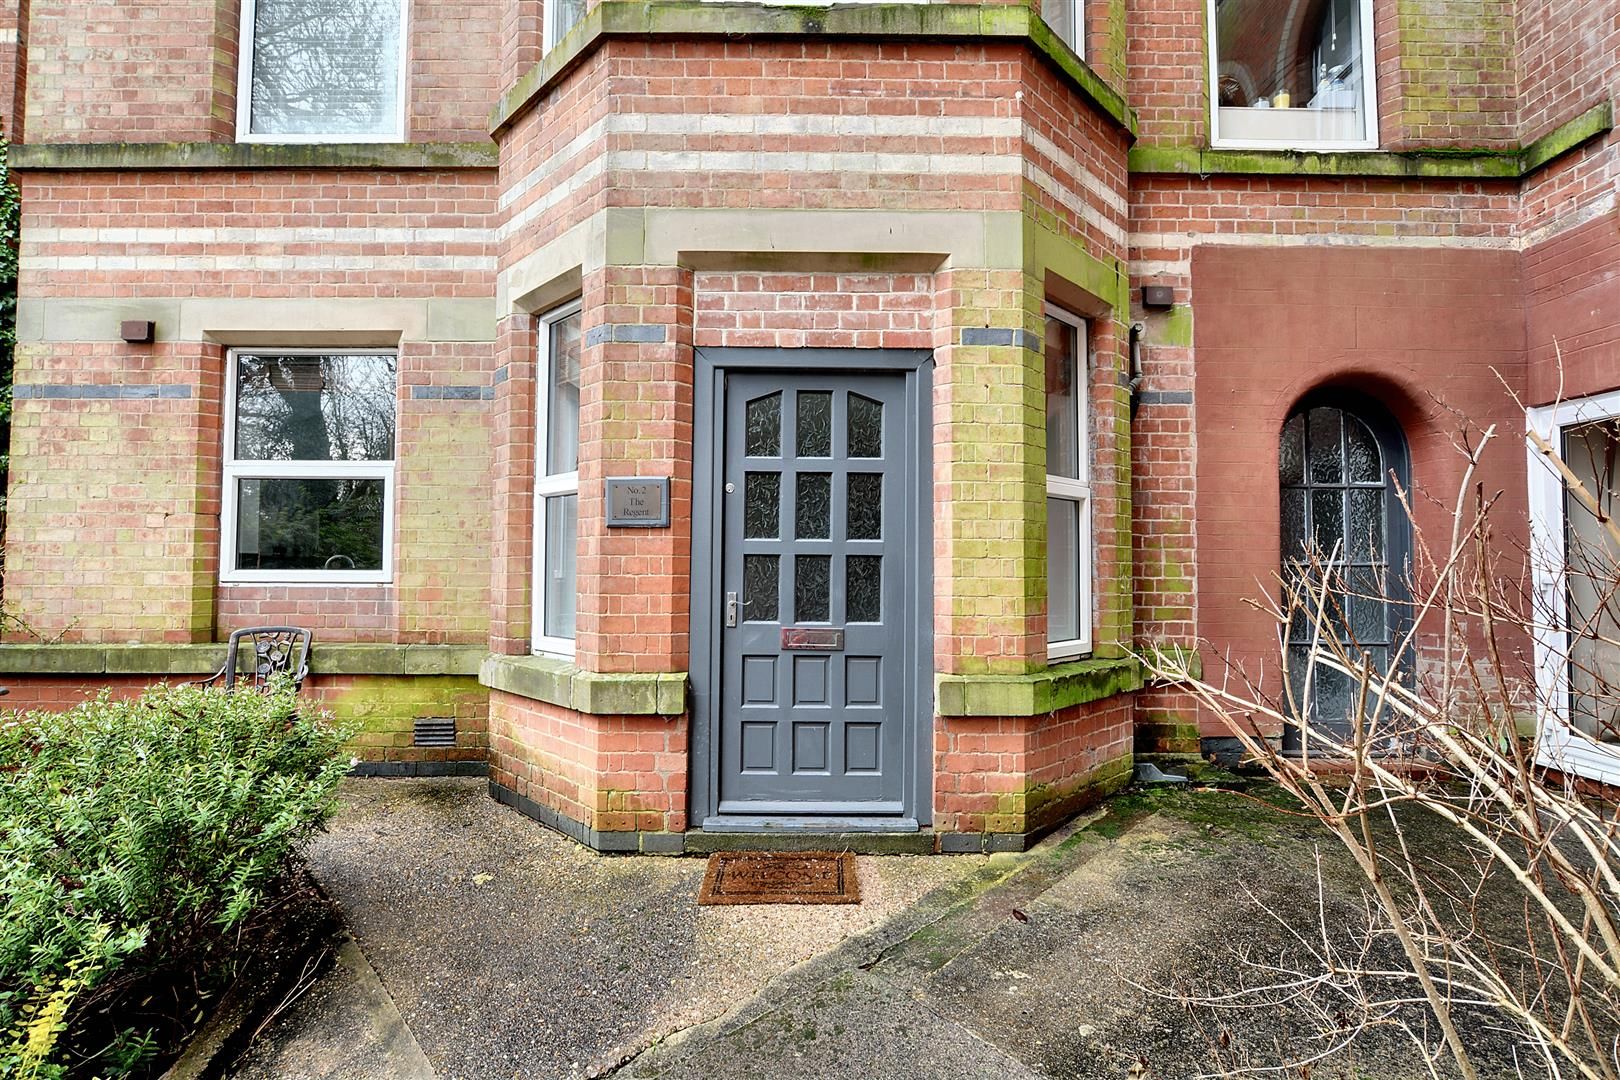 Hine Hall, Mapperley, Nottingham, NG3 5PD